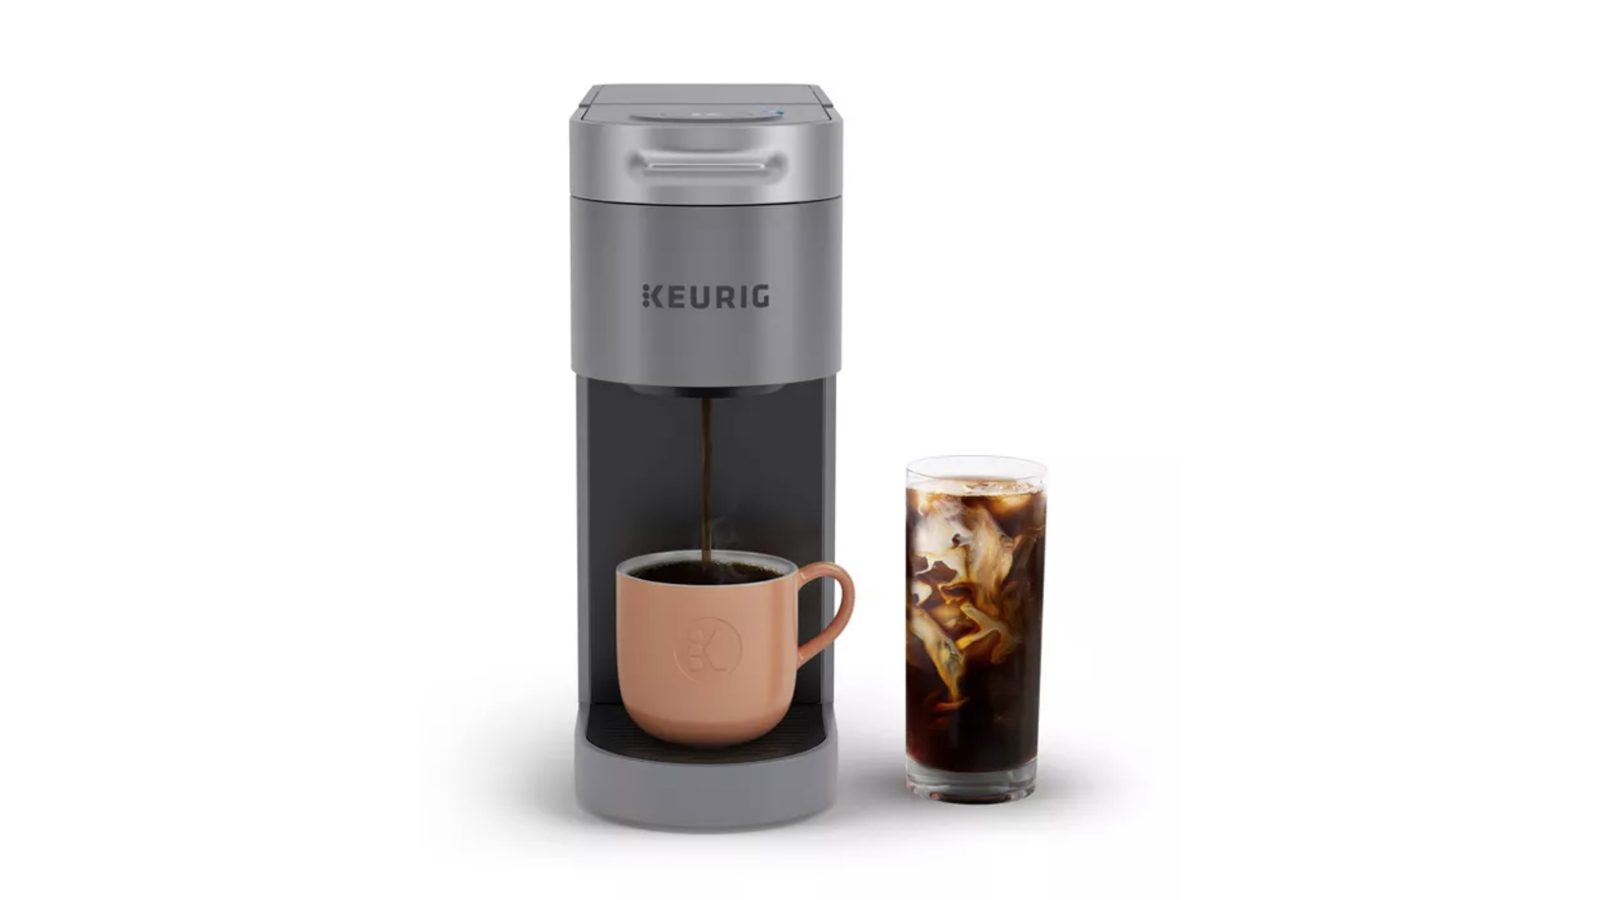 Grab One of These Keurig Coffee Makers and Save Up to $70 - CNET